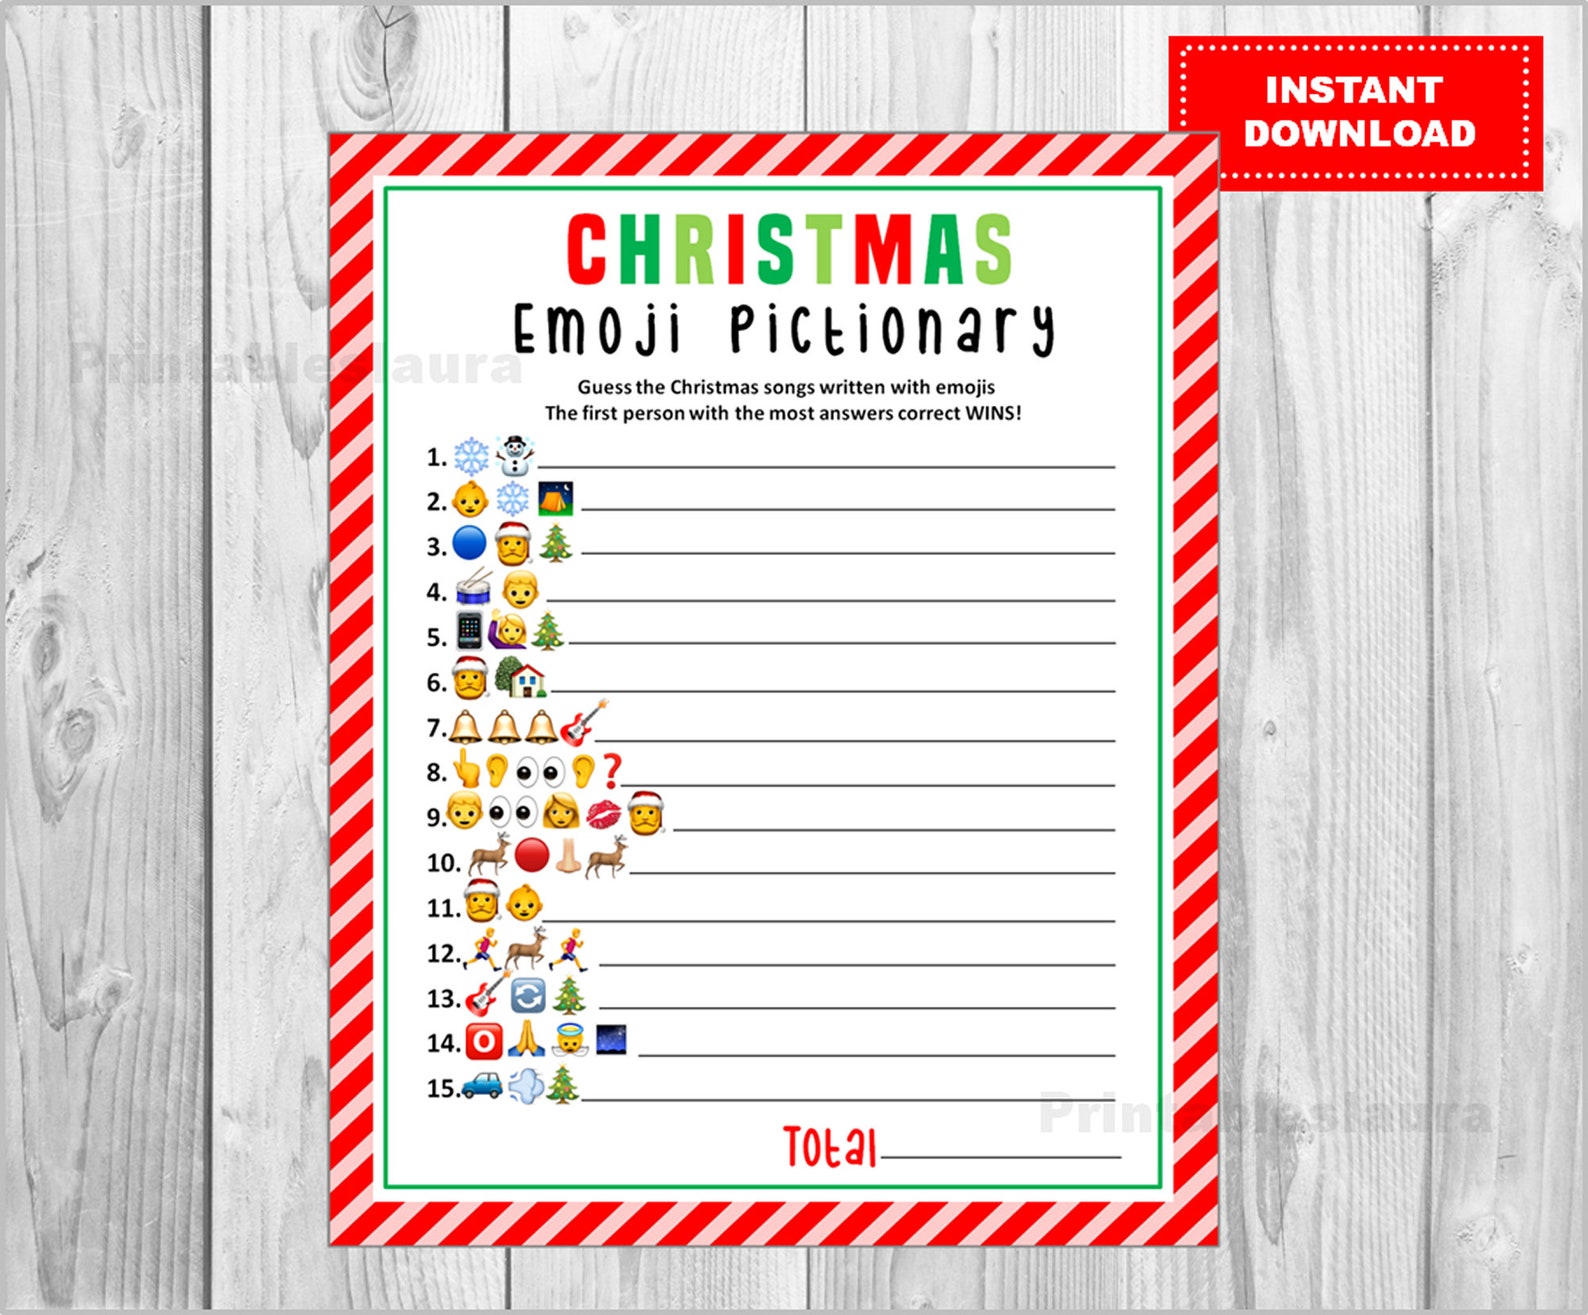 Christmas Songs EMOJI Pictionary With a Red Stripes Background ...